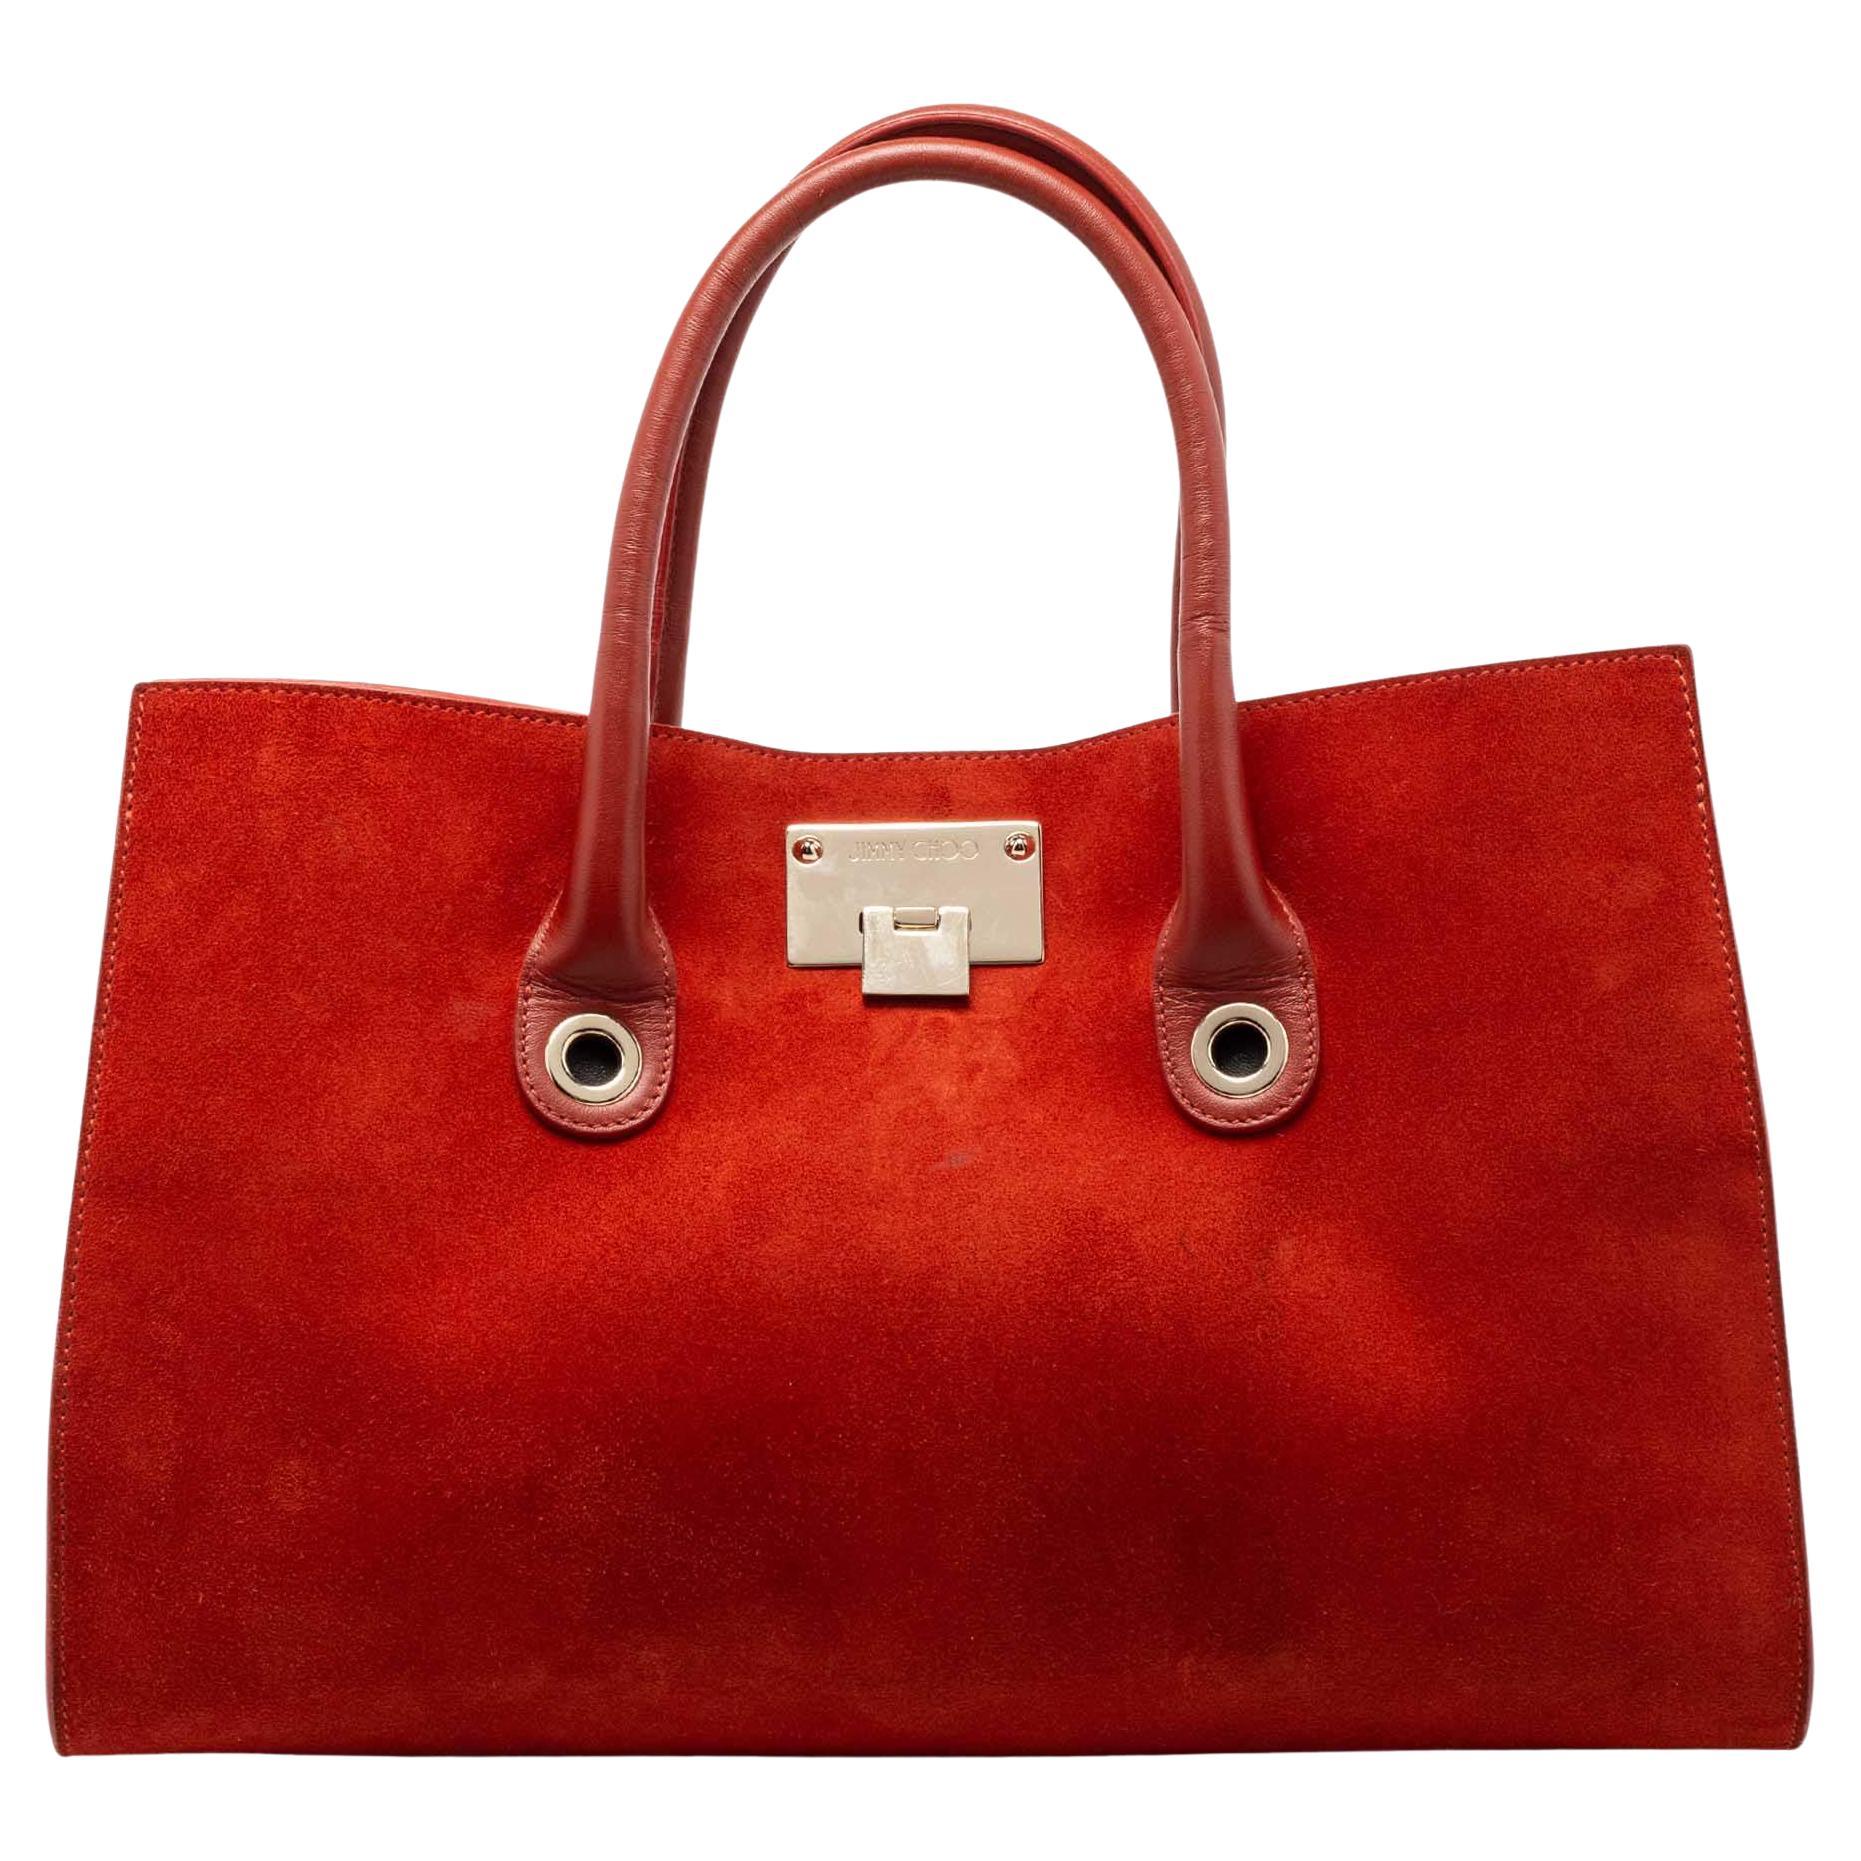 Jimmy Choo Orange Suede And Leather Riley Tote